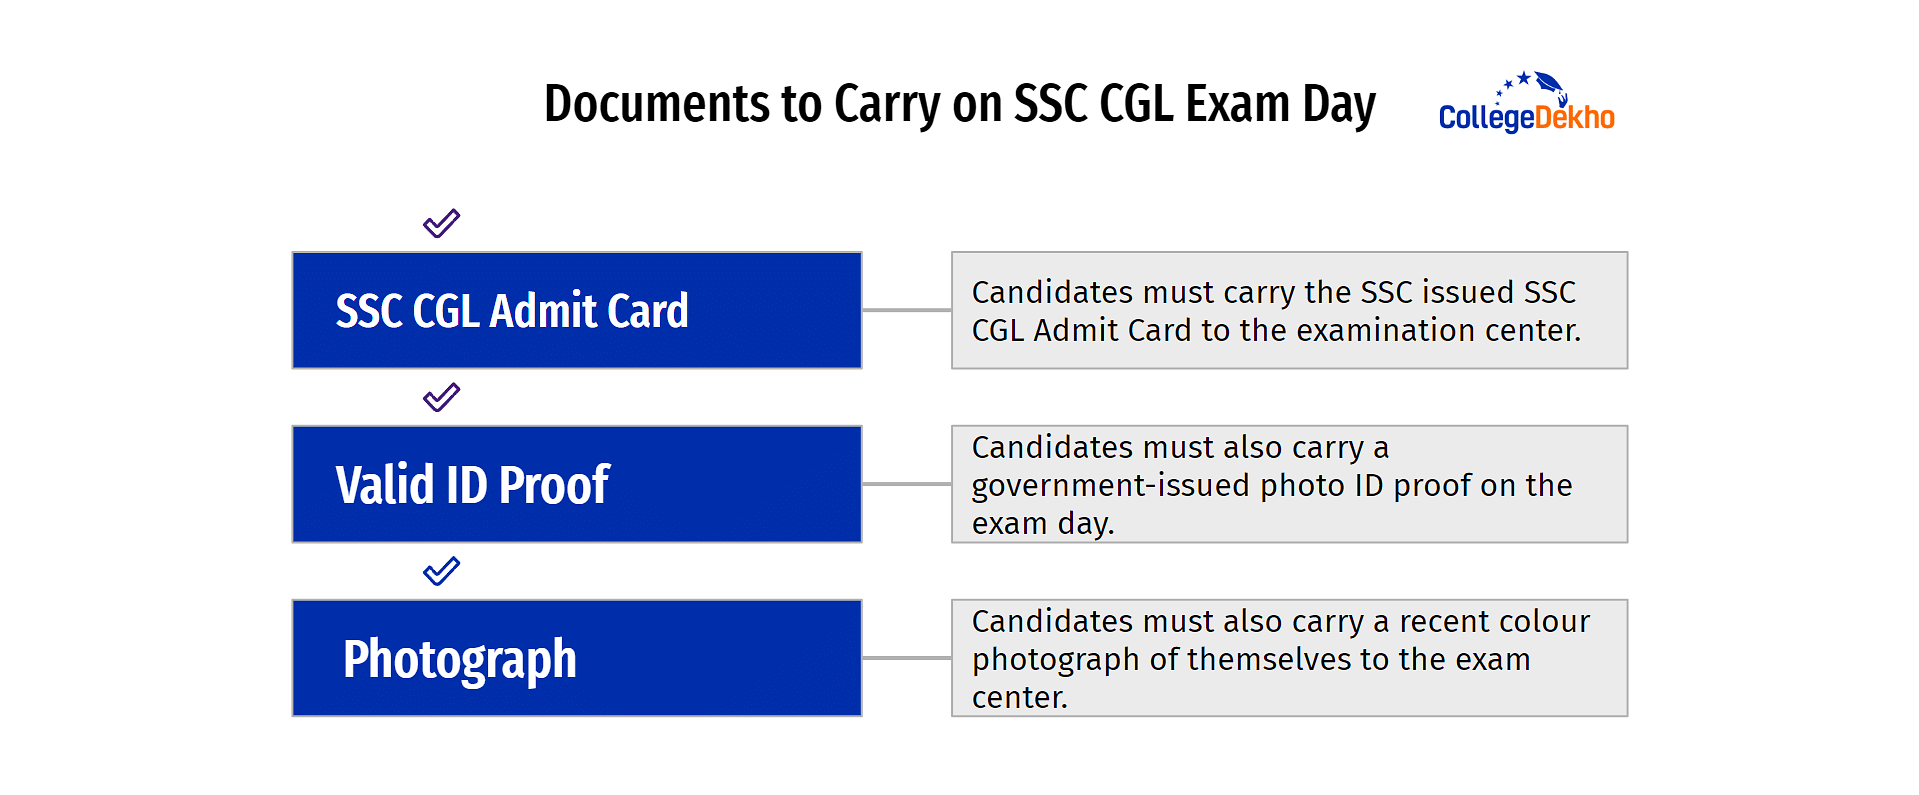 Documents to Carry on SSC CGL Exam Day